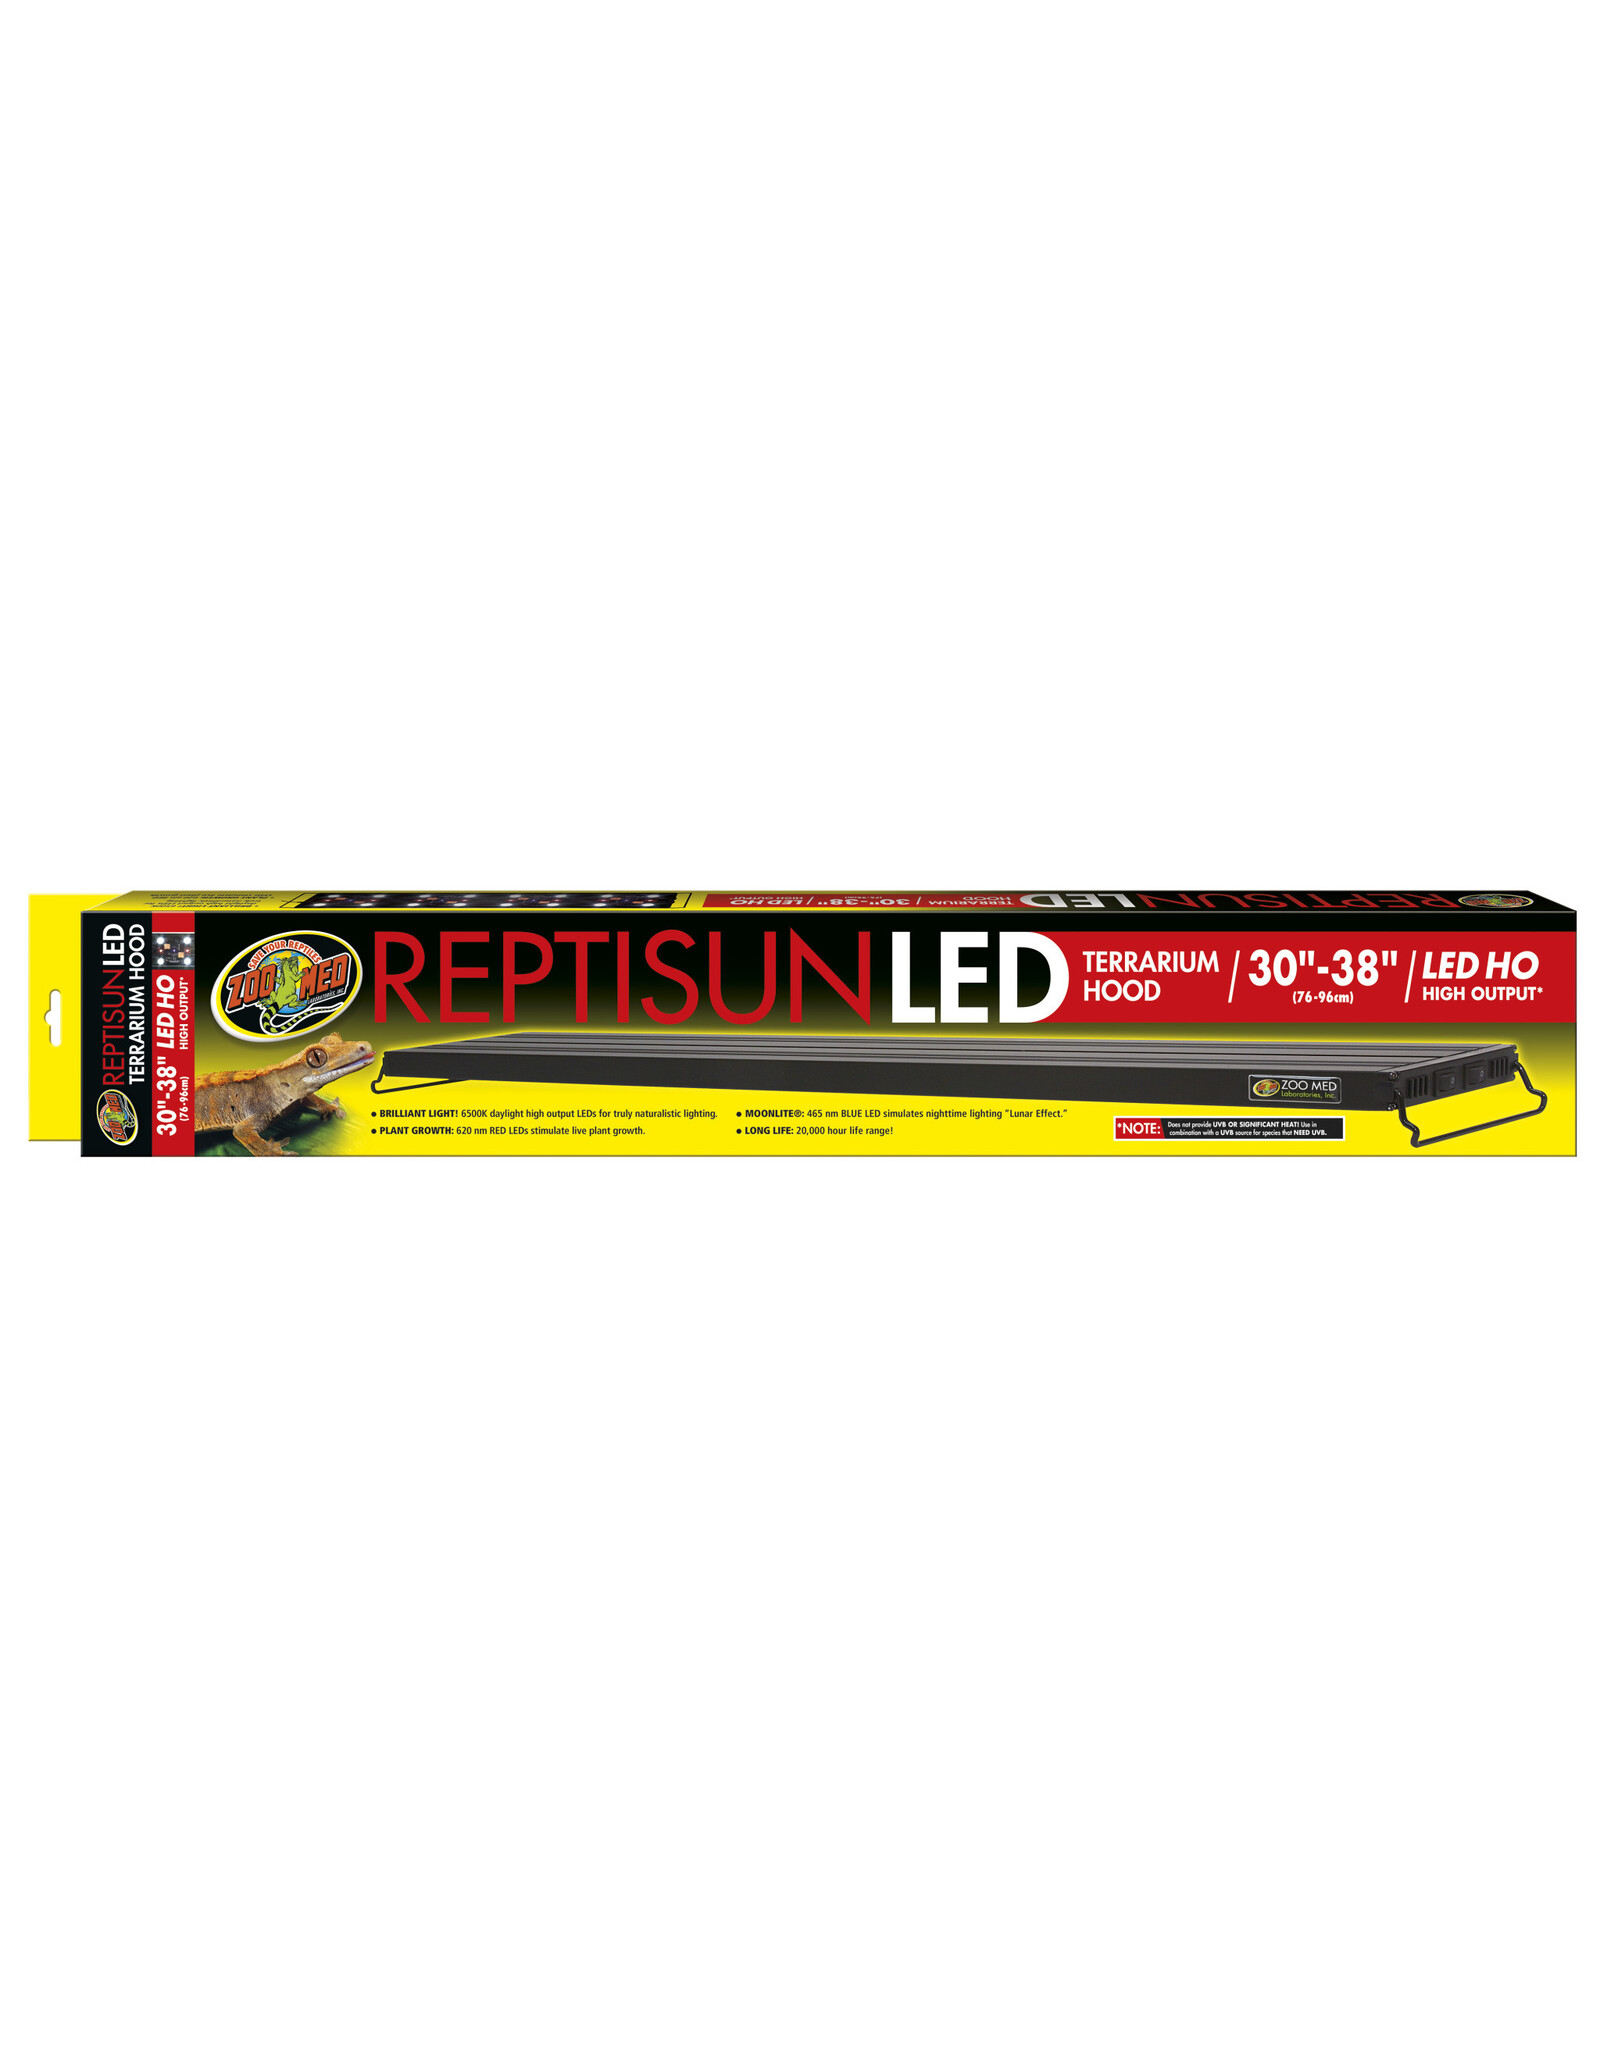 Zoo Med Zoo Med ReptiSun LED Fixture 30-38"